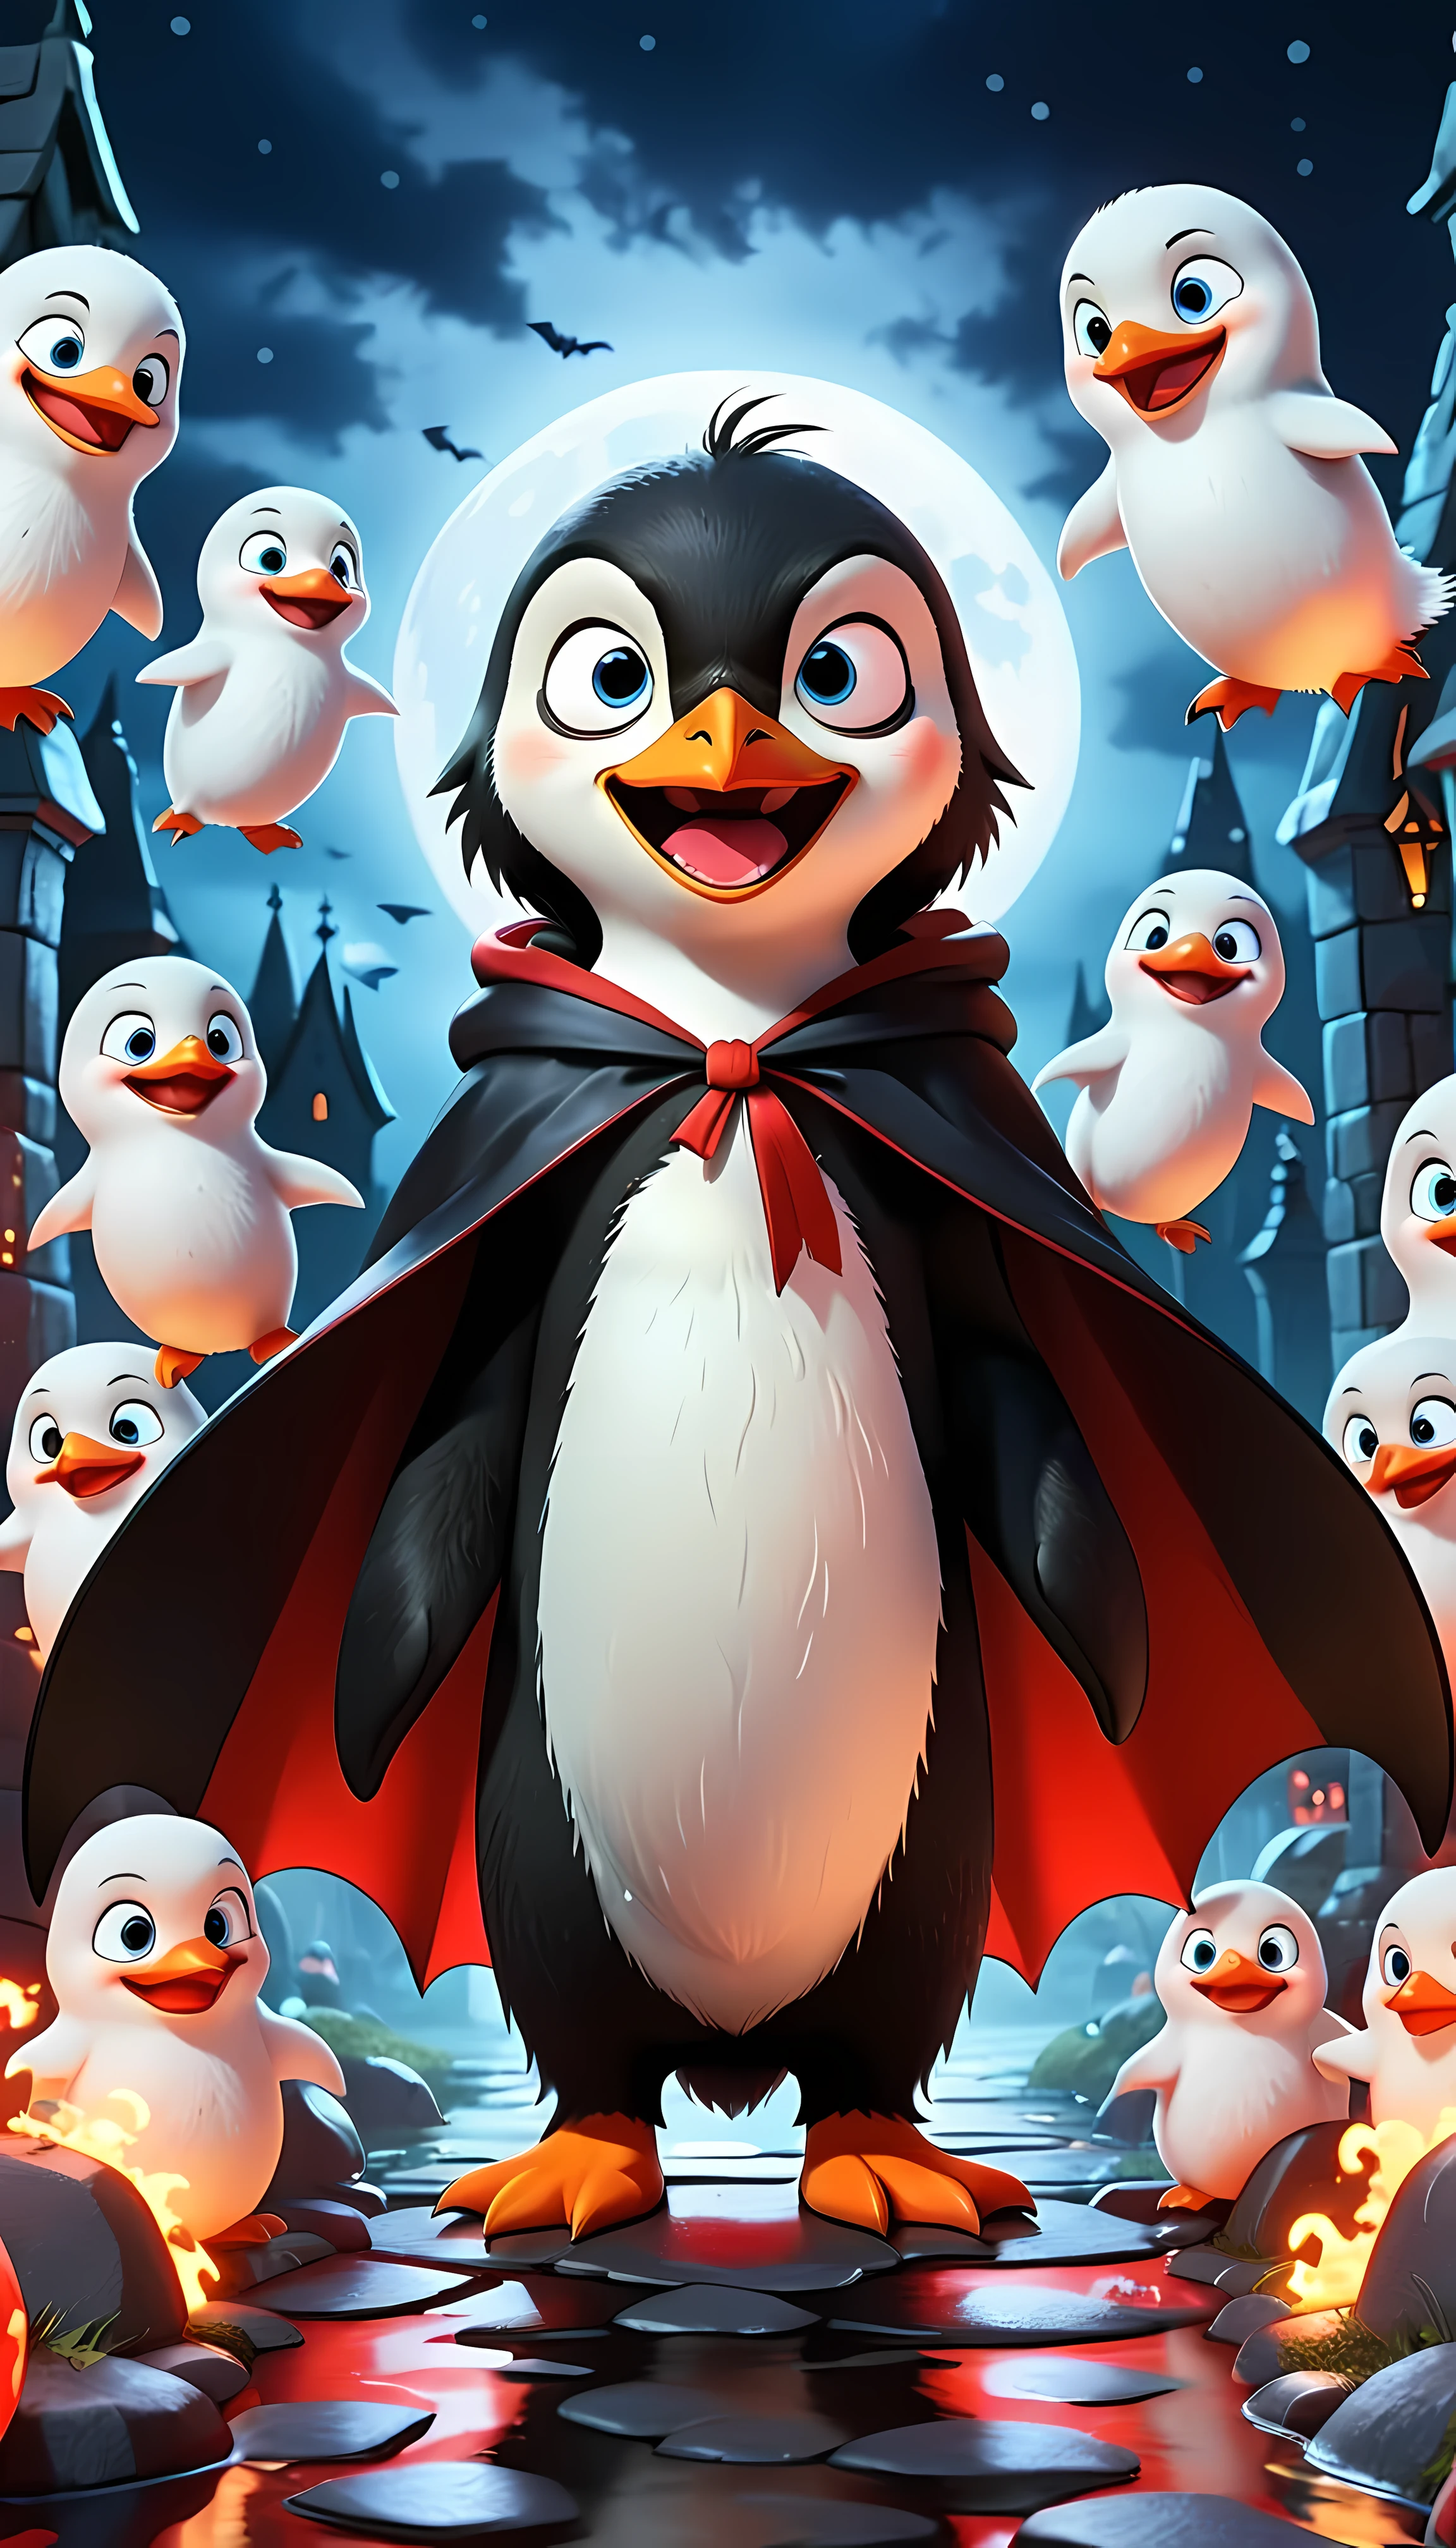 CuteCartoonAF, Cute Cartoon, Vlad the Penguin, a friendly and stylish penguin vampire dressed in a sleek black cape with striking red lining, surrounded with adorable floating ghosts amidst the moonlit graveyard setting. | ((More_Detail))